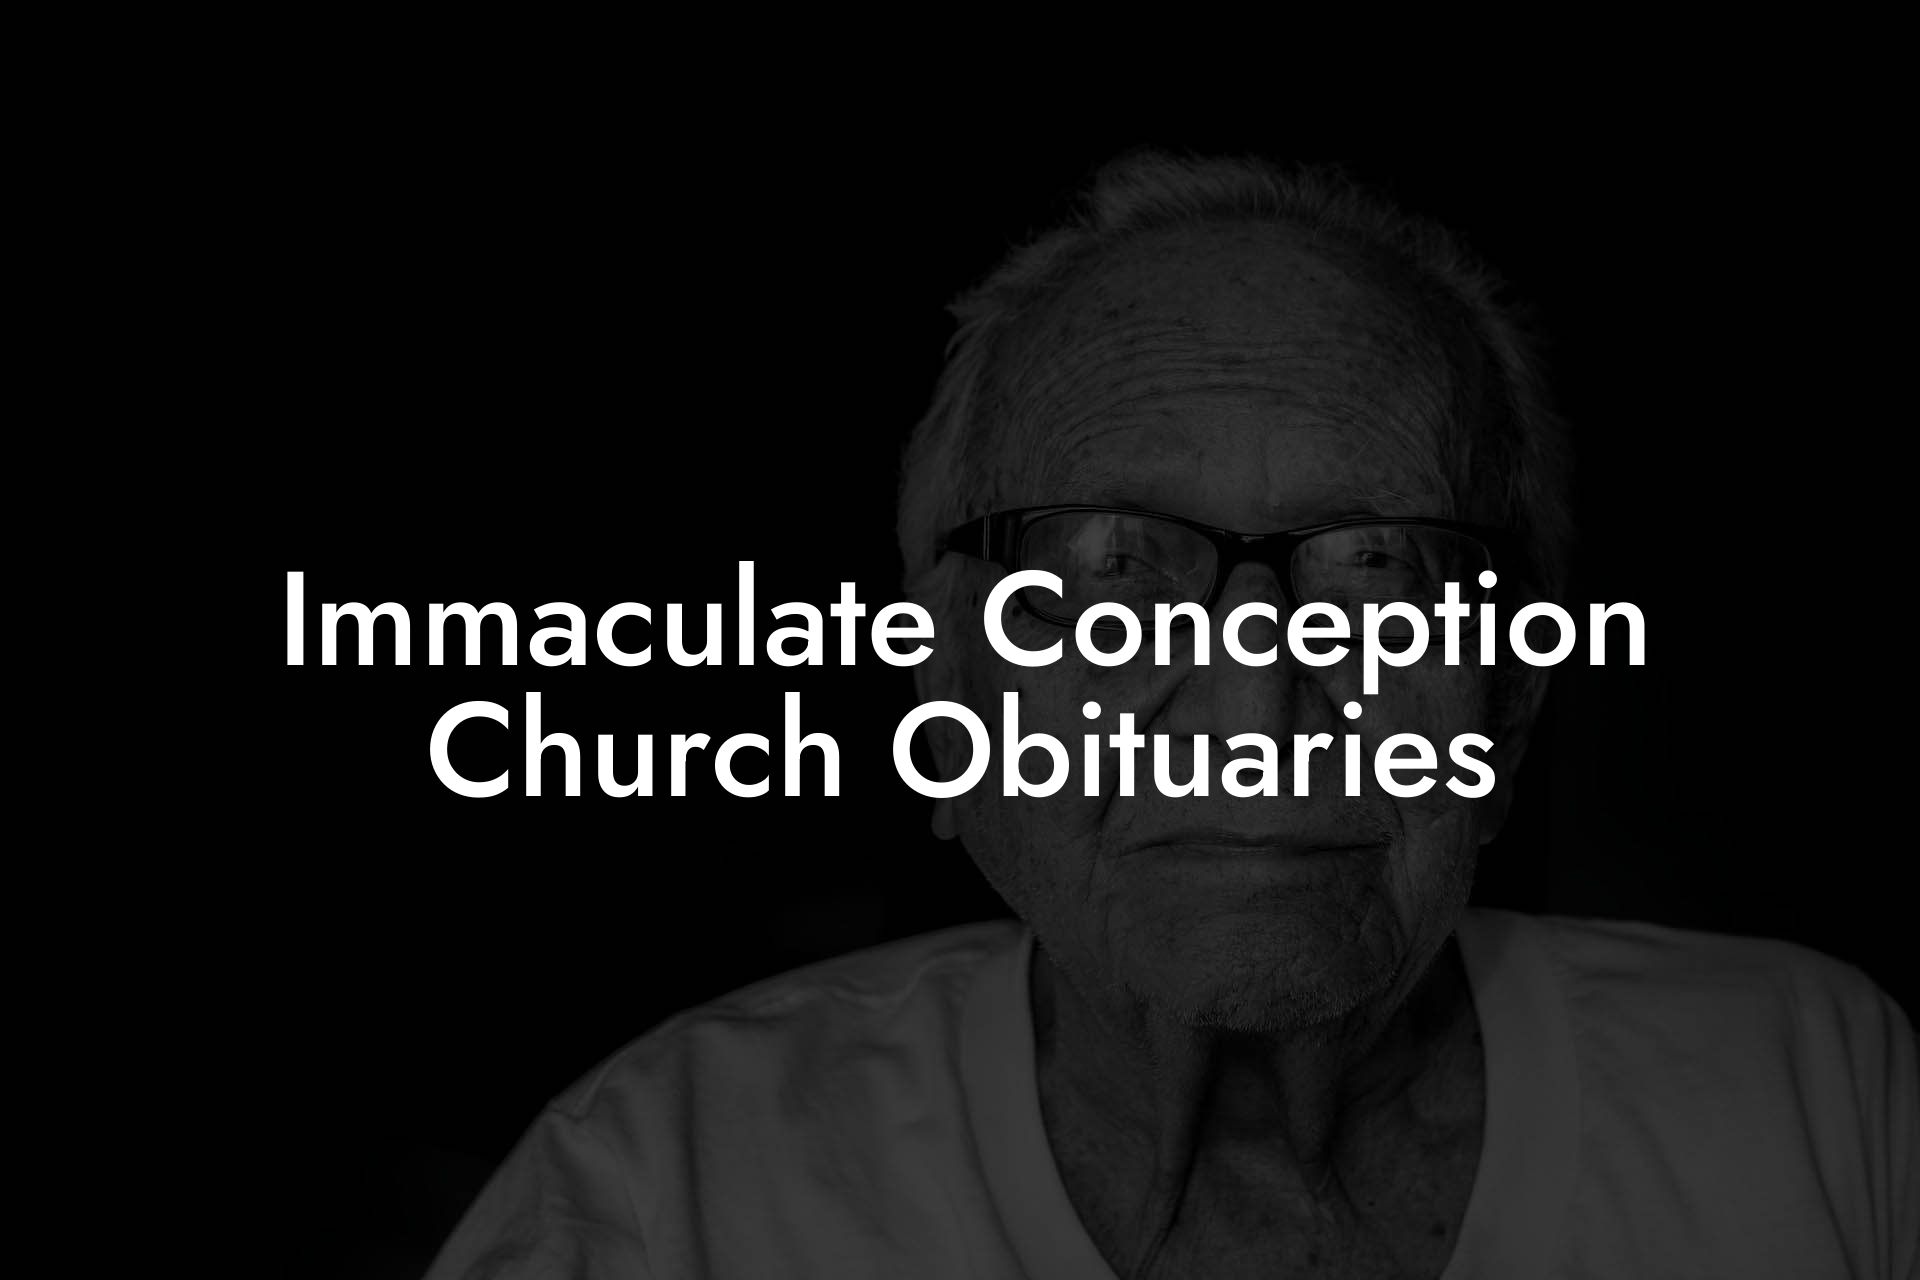 Immaculate Conception Church Obituaries